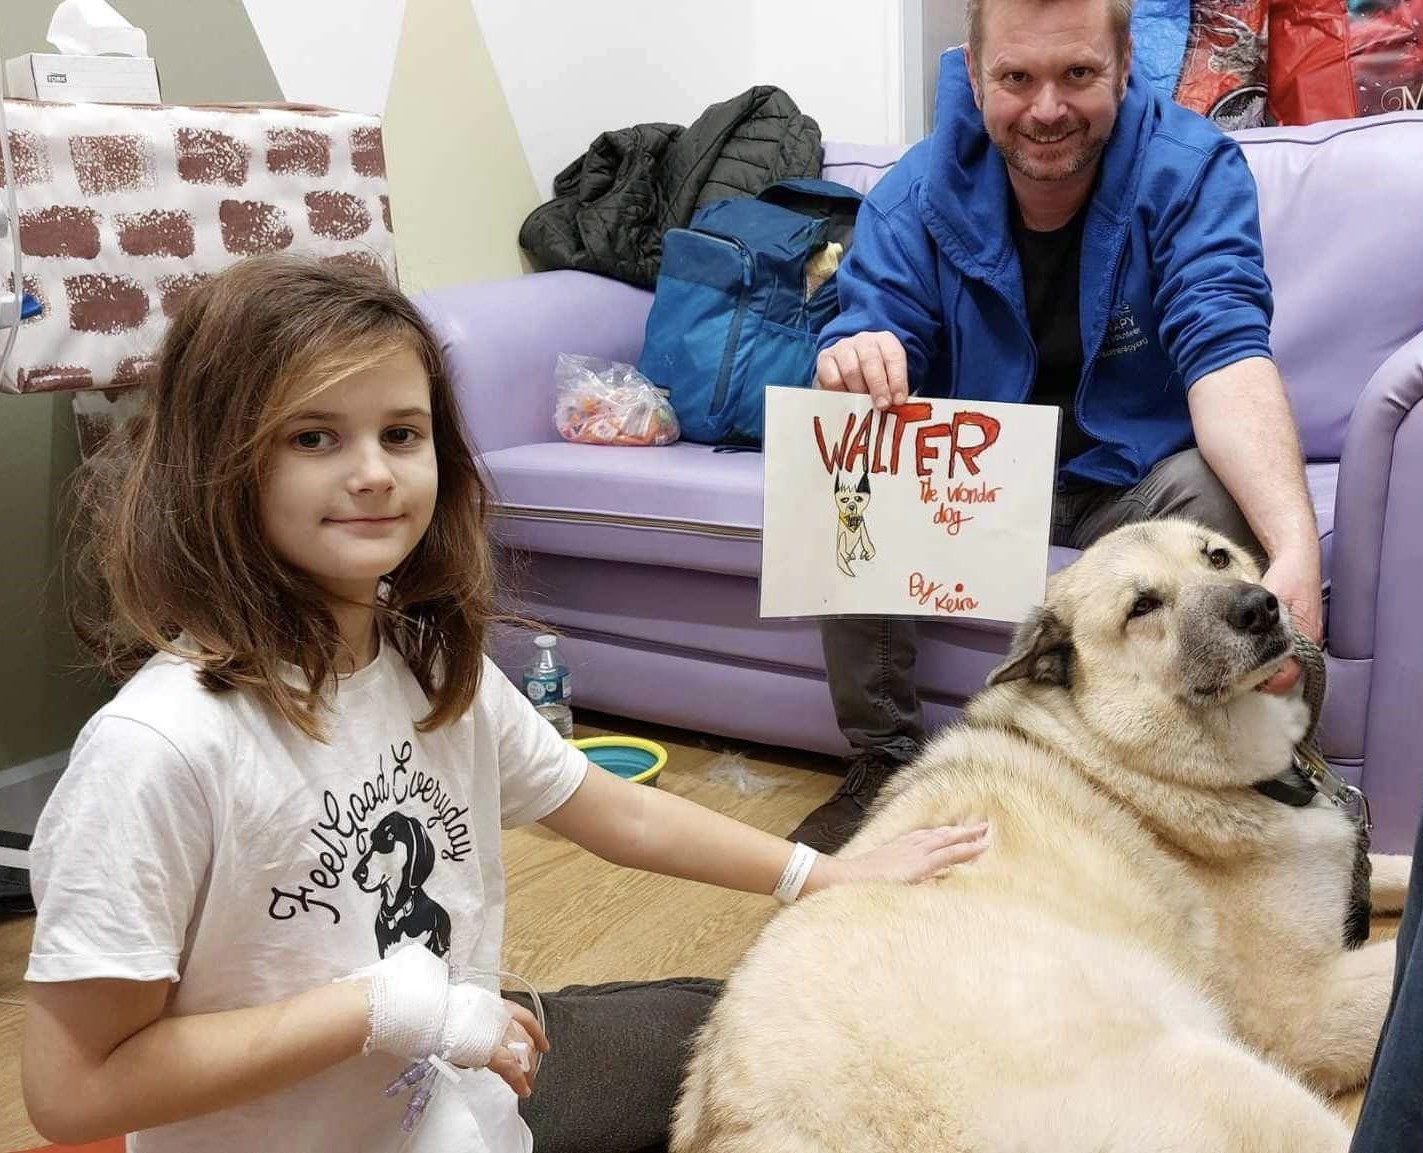 Walter the Therapy Dog 5.jpg